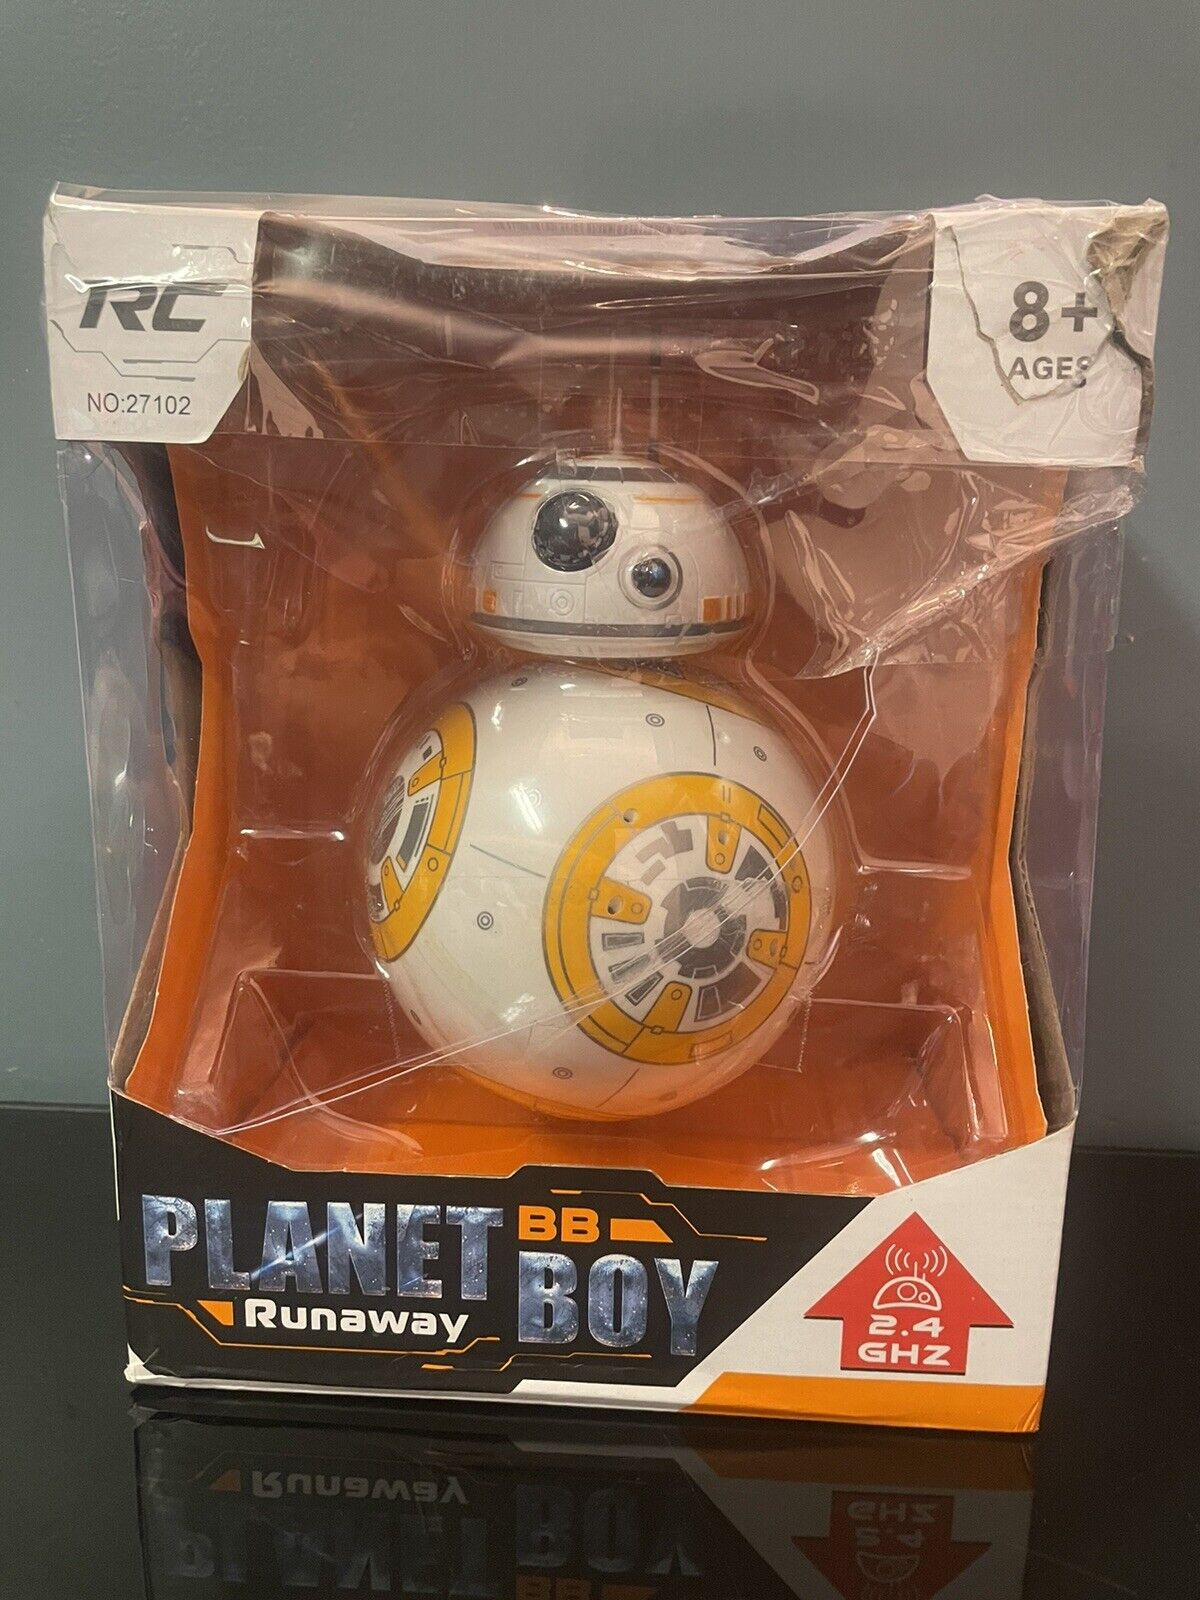 Star Wars Upgrade Rc Bb8 Robot With Sound And Dancing Action Figure Toys 2.4g